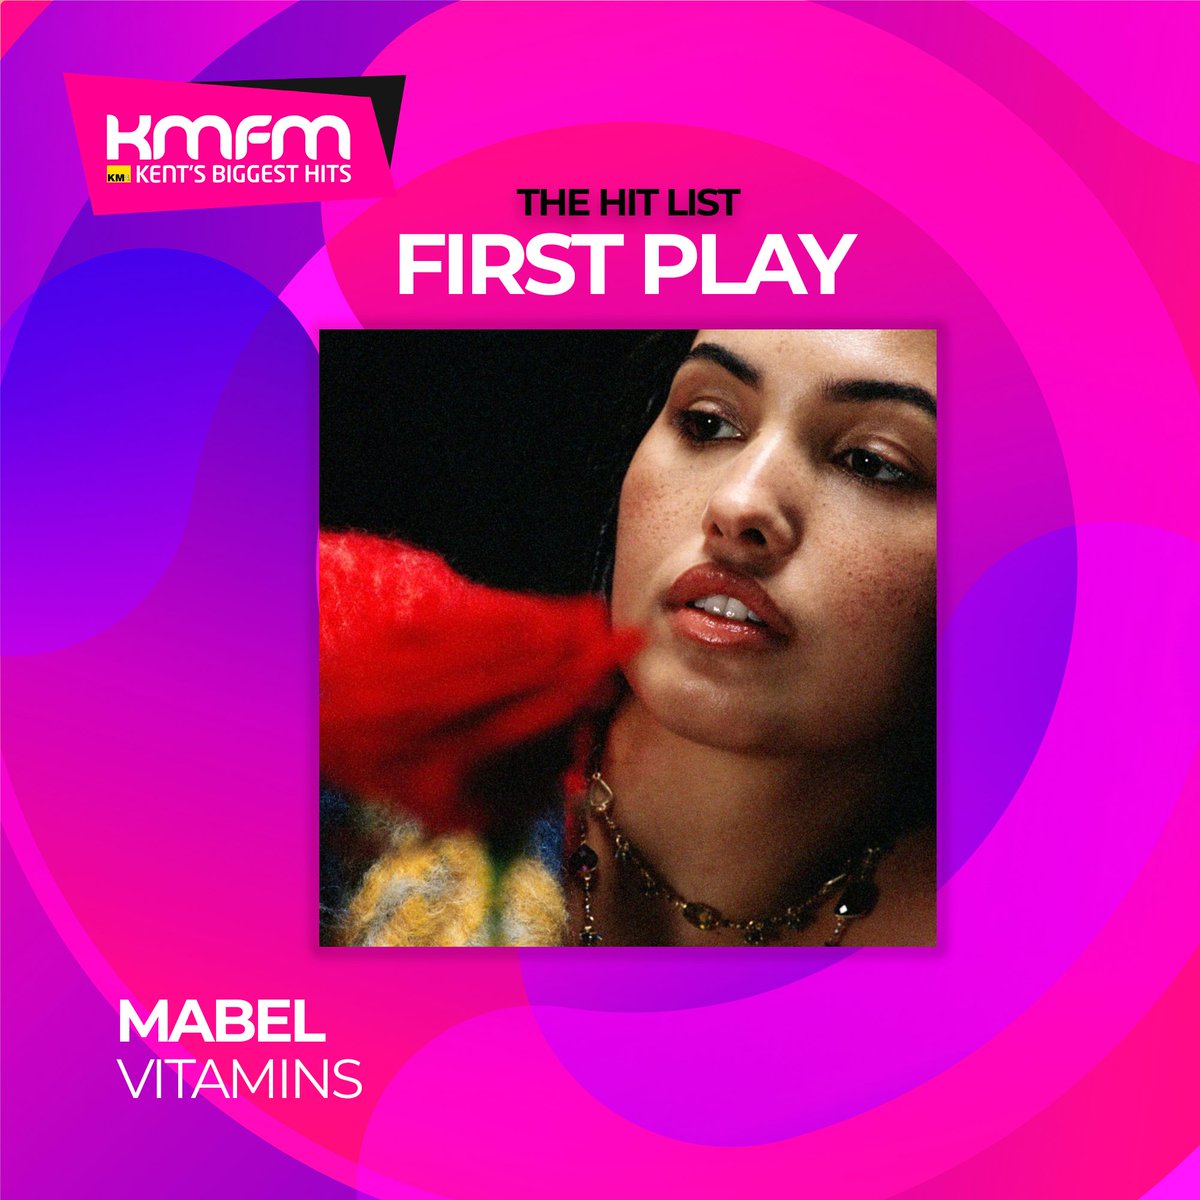 🥗 The return of @Mabel is a HEALTHY one. Check out her comeback hit after a few years away...

#Vitamins is tonight's #FirstPlay across #Kent!

🔊 kmfm.co.uk/player